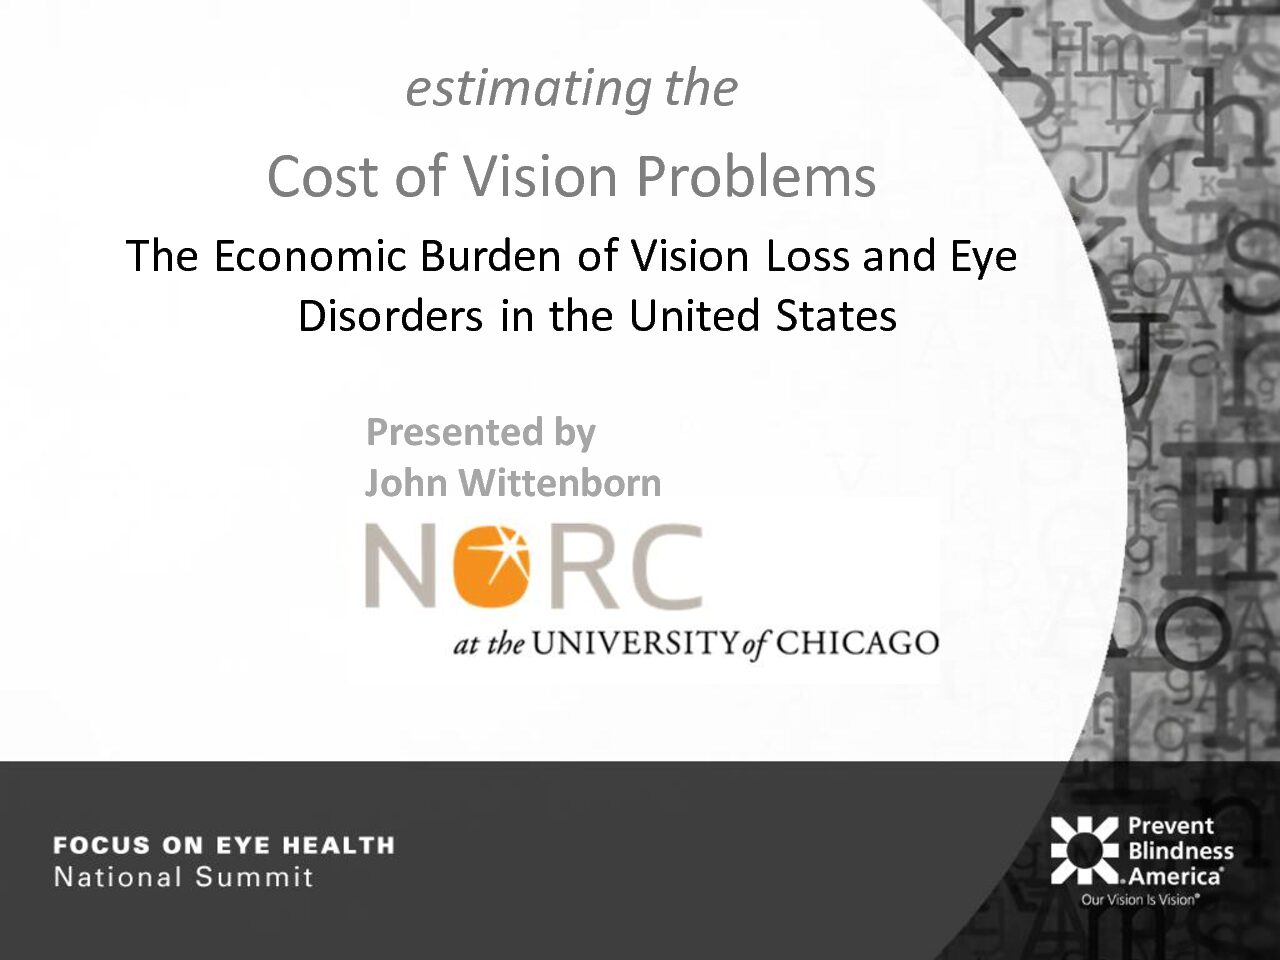 Estimating the Cost of Vision Problems: The Economic Burden of Vision Loss and Eye Disorders in the United States